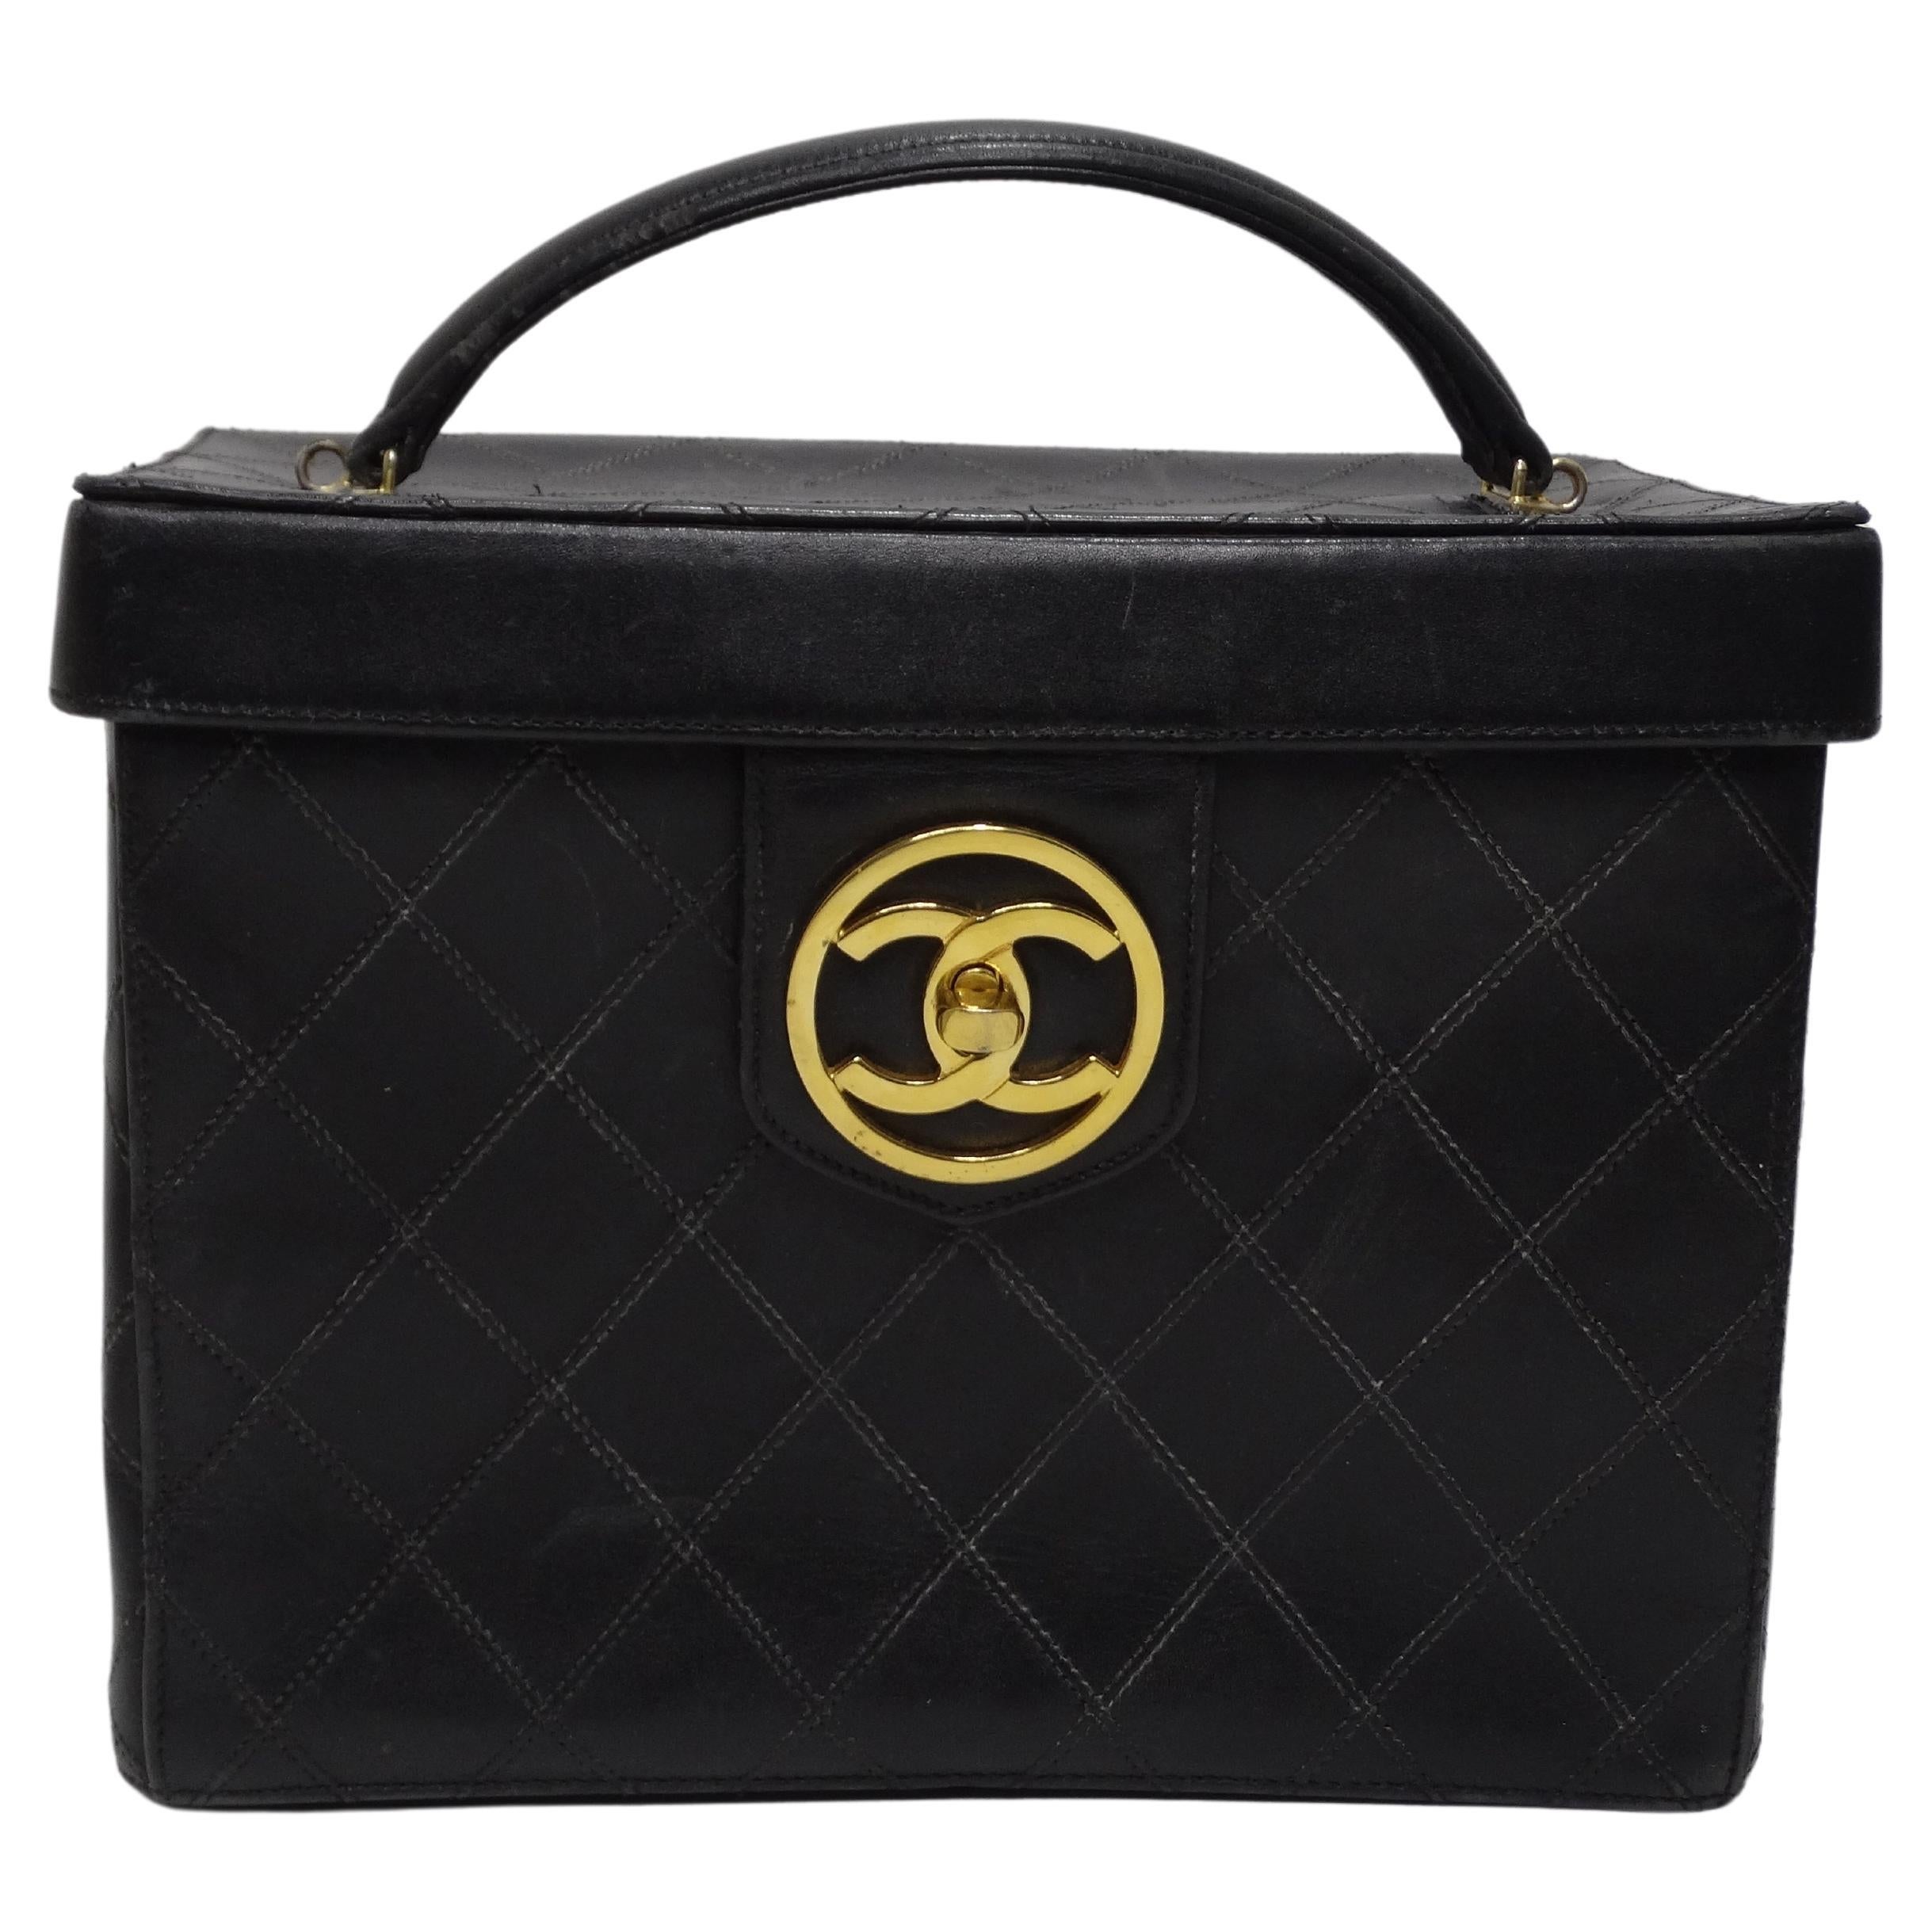 Simplicity and functionality meets Chanel! This is a vintage Chanel gem! Straight from the 1990's; this durable and easy-to-clean makeup case is ready for another life. The functionality of this piece is endless it is a cosmetic bag that also